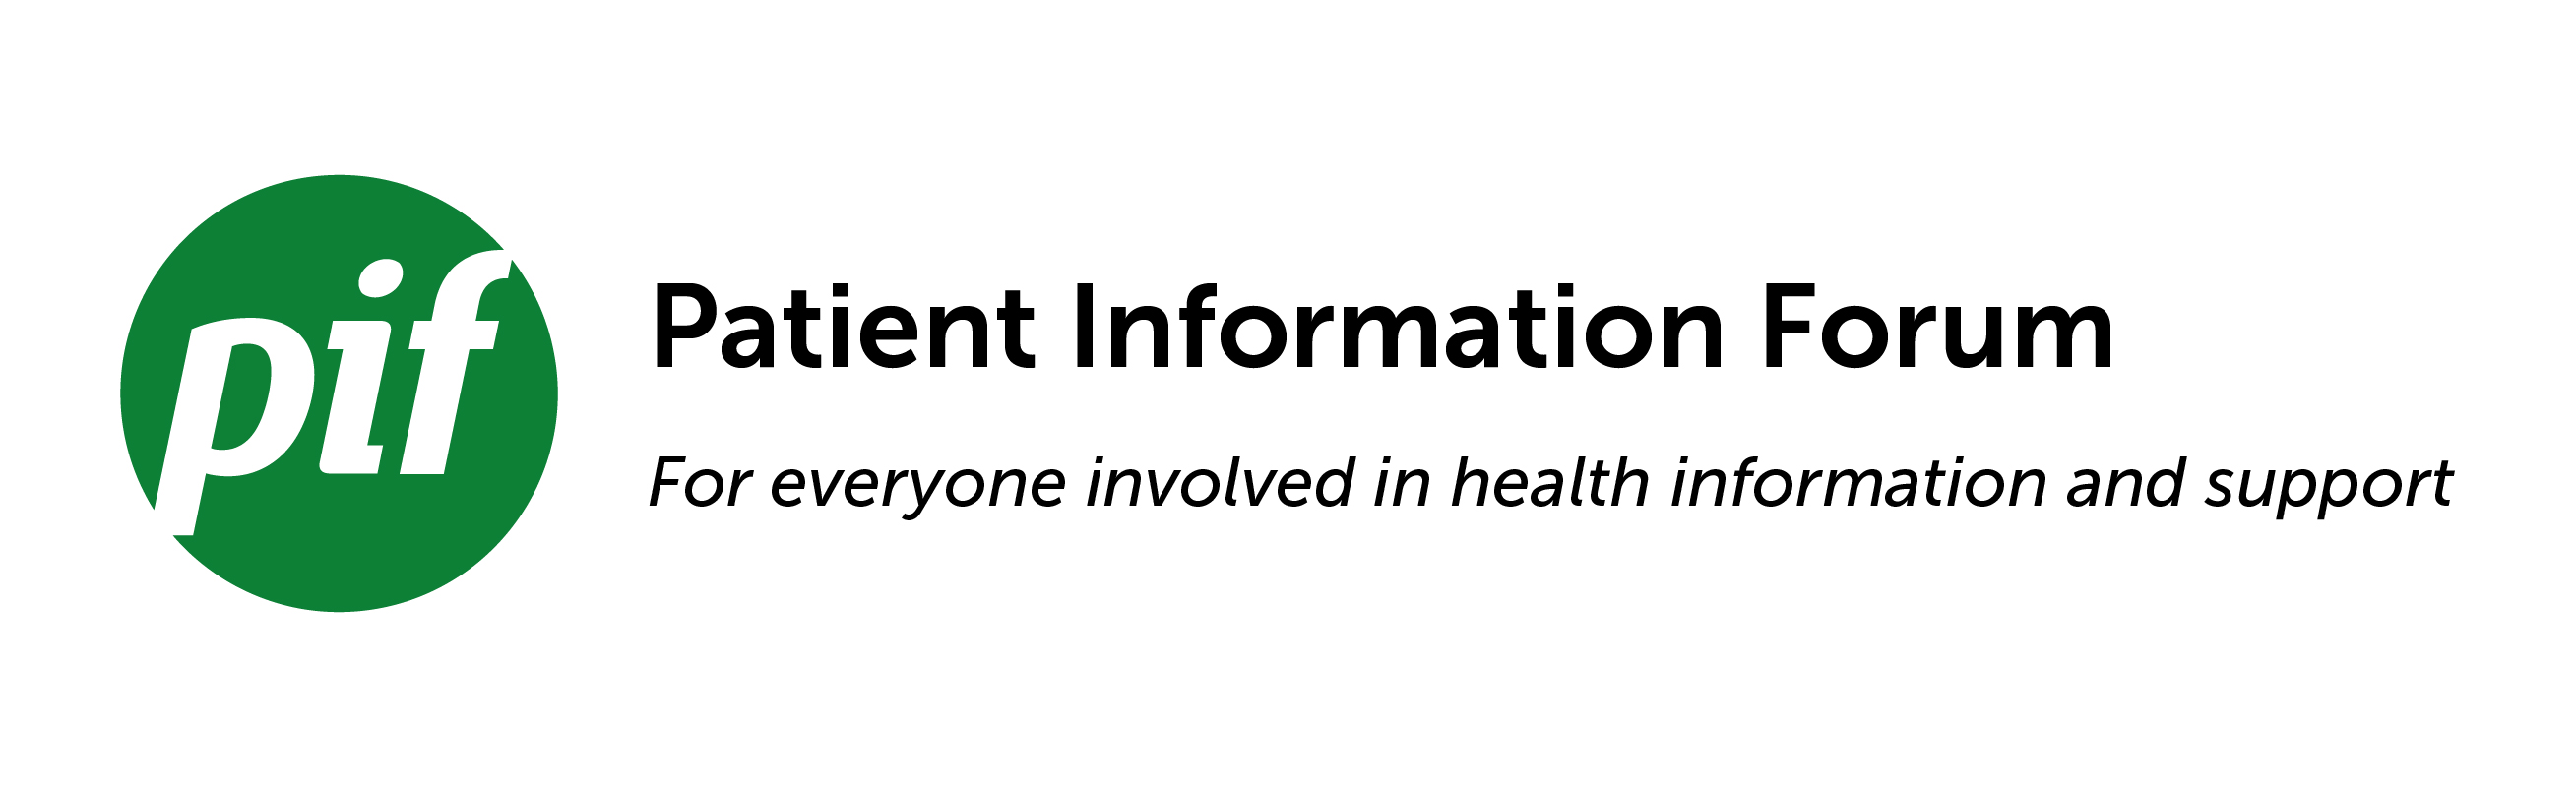 What type of information is shared about patients?